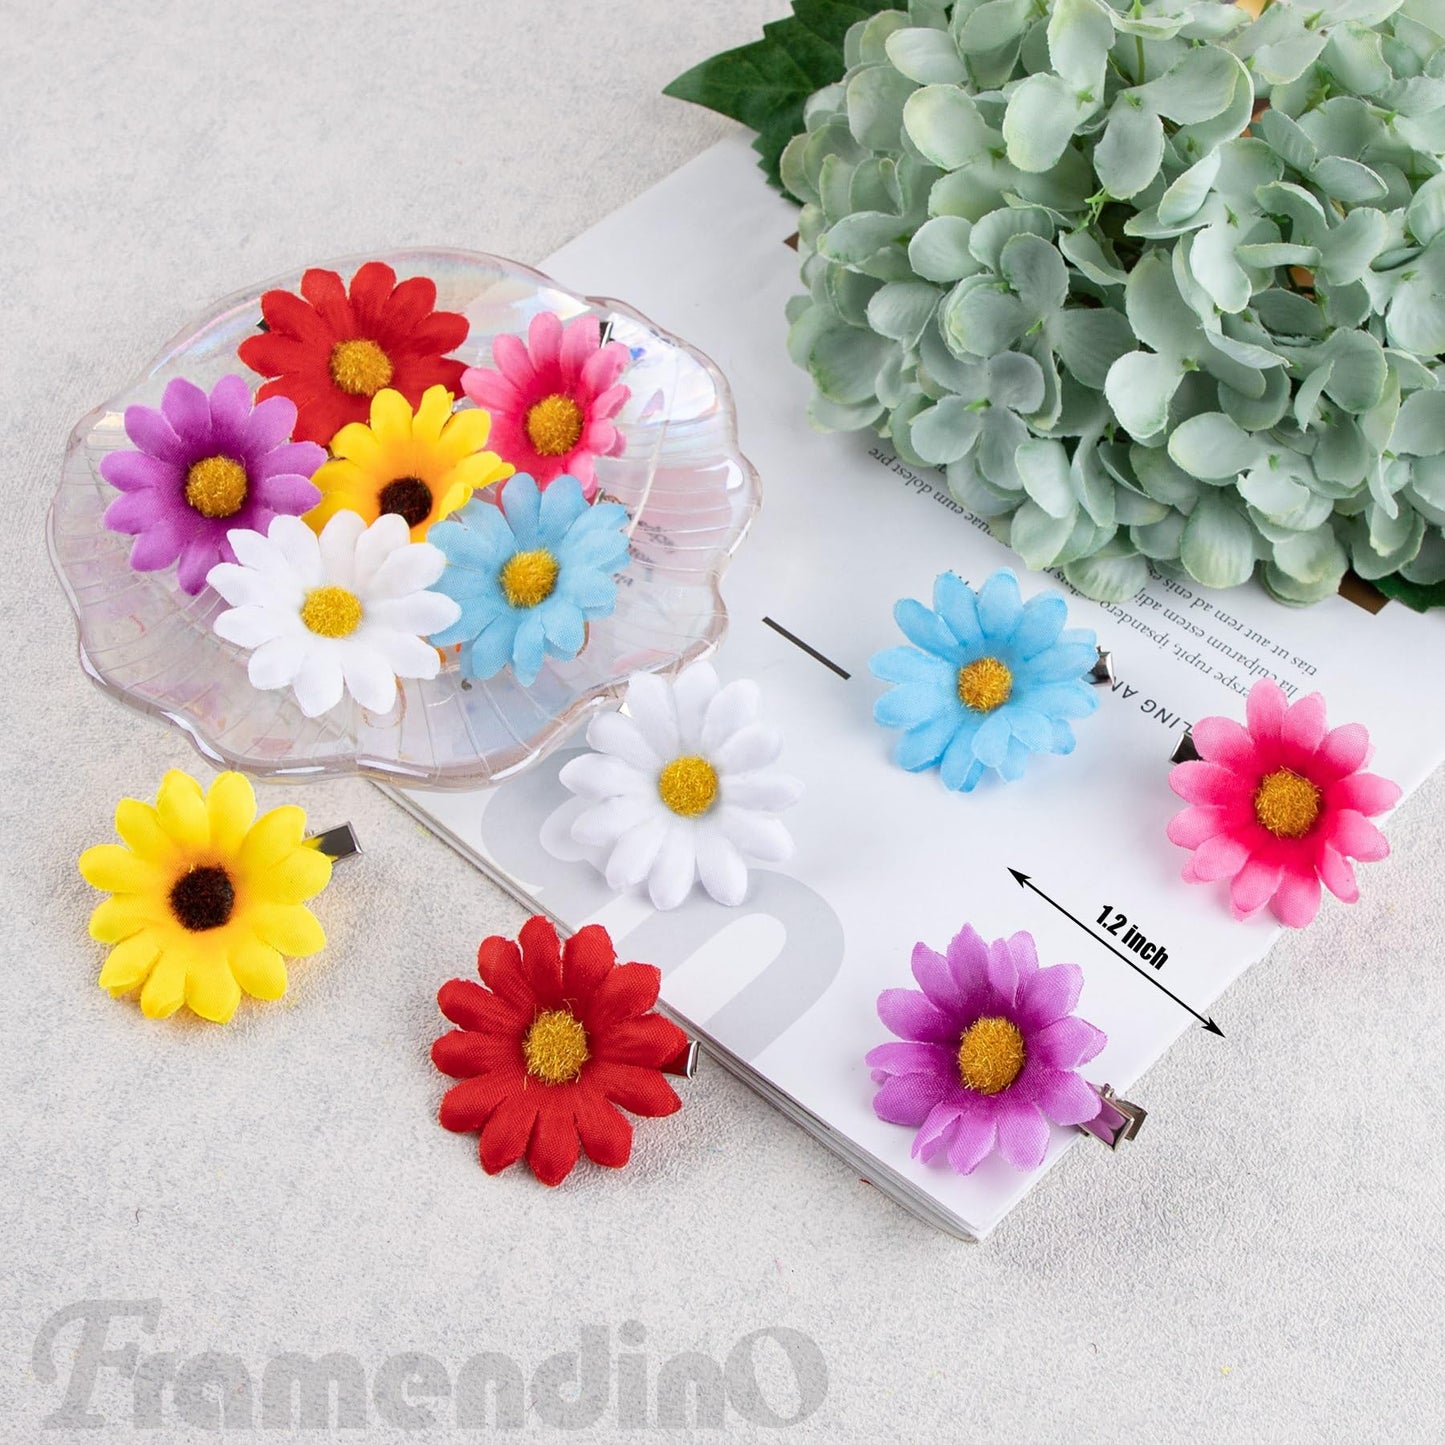 Framendino, 36 Pack Sunflower Daisies Hair Clips Flower Daisy Clips for Wedding Party 6 Colors